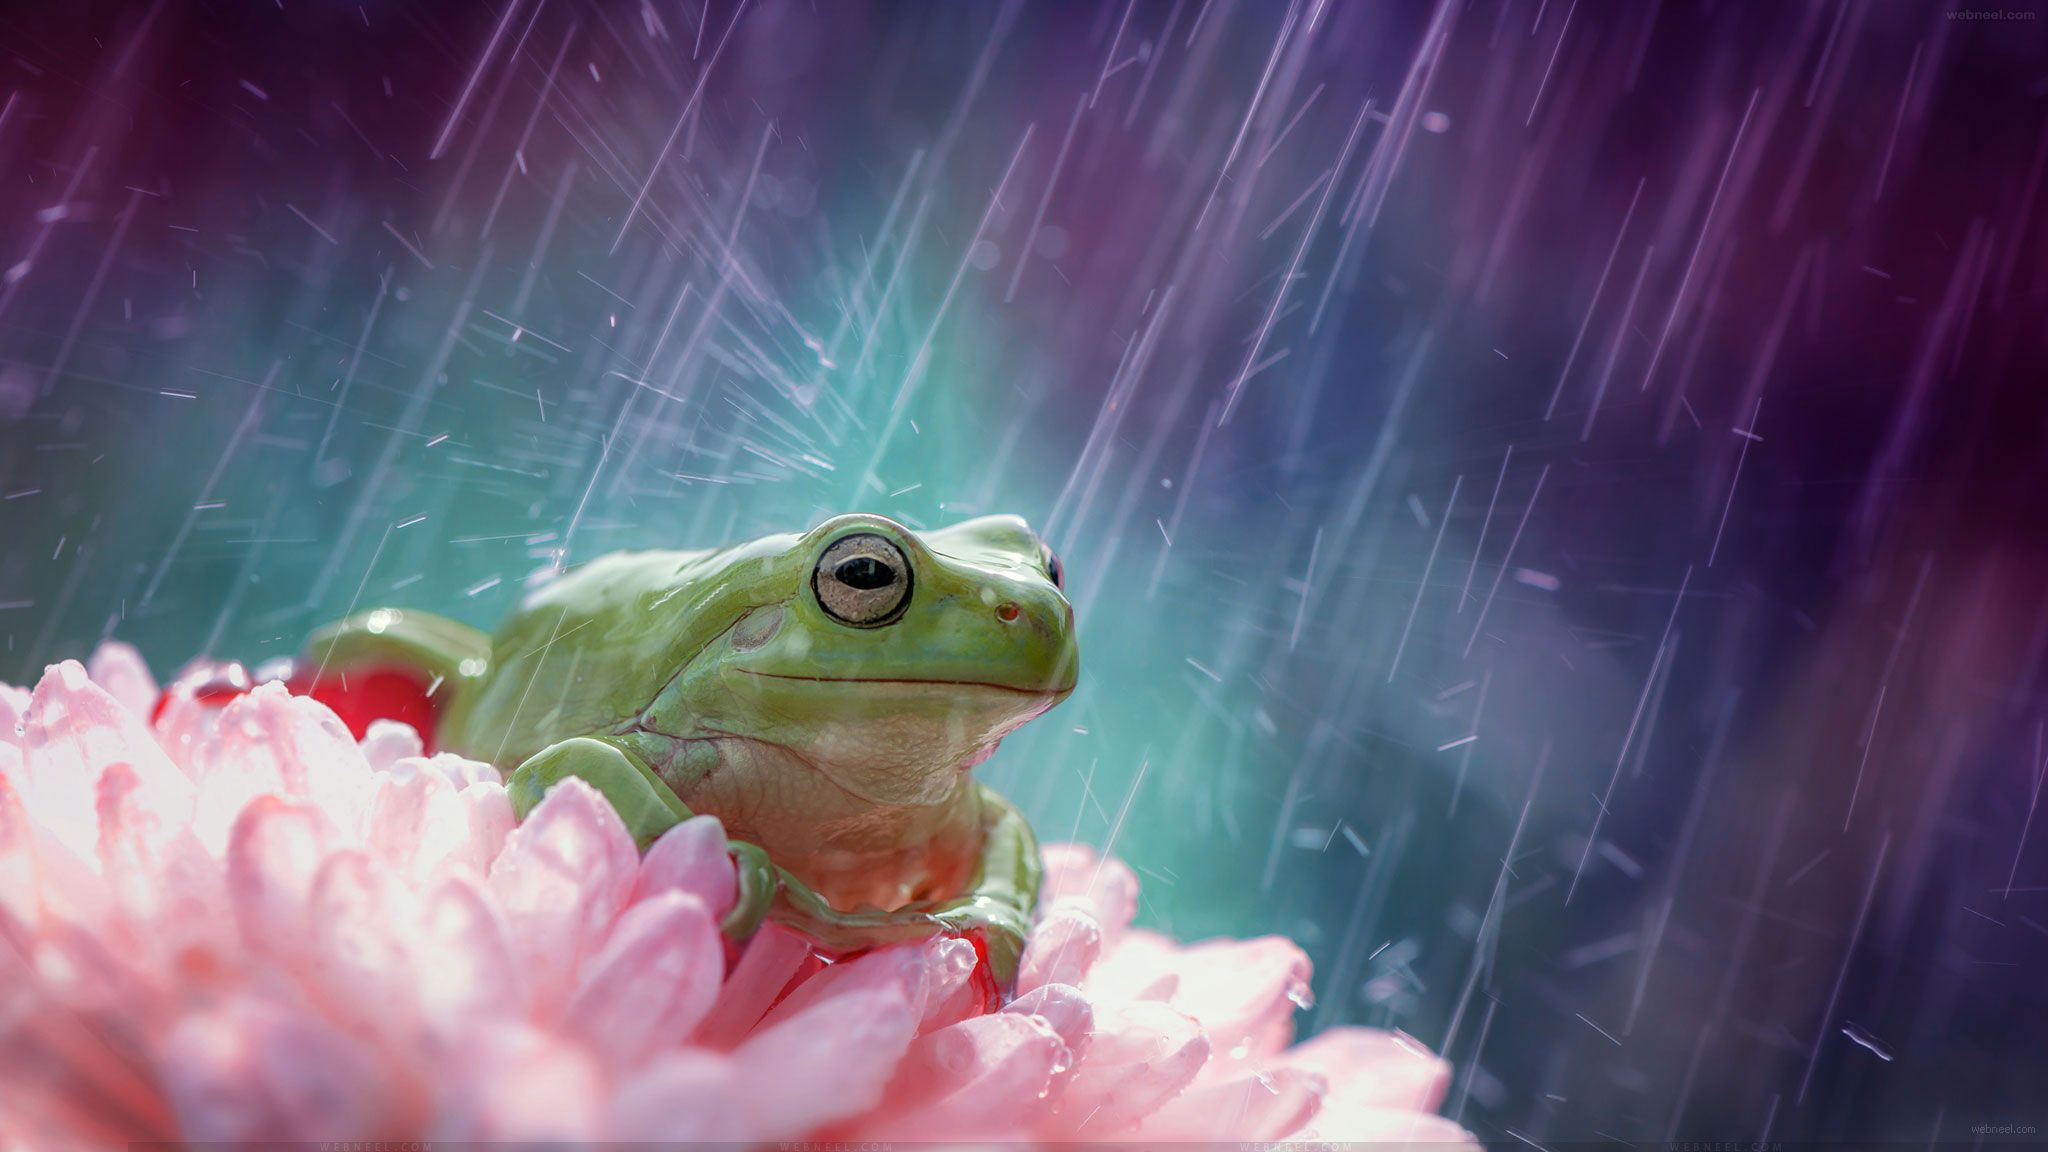 Beautiful Rain Wallpaper for your desktop mobile and tablet